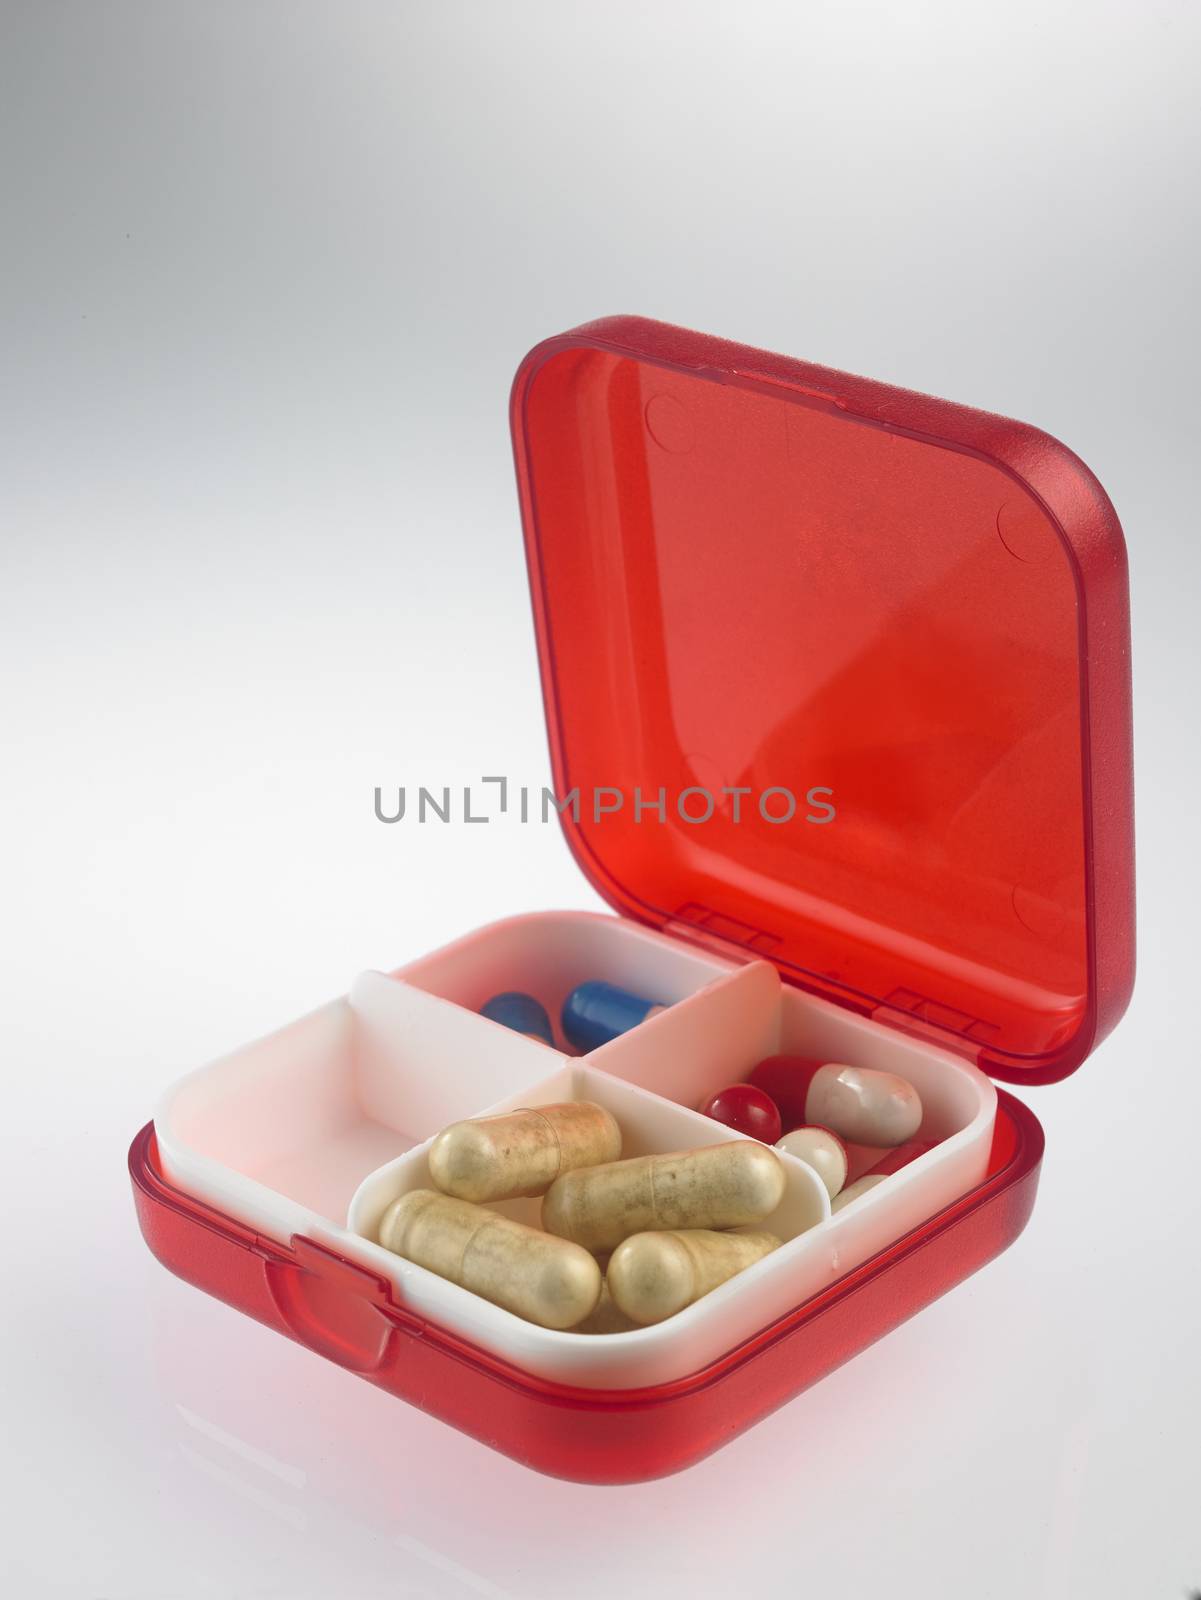 red pill box with medicine